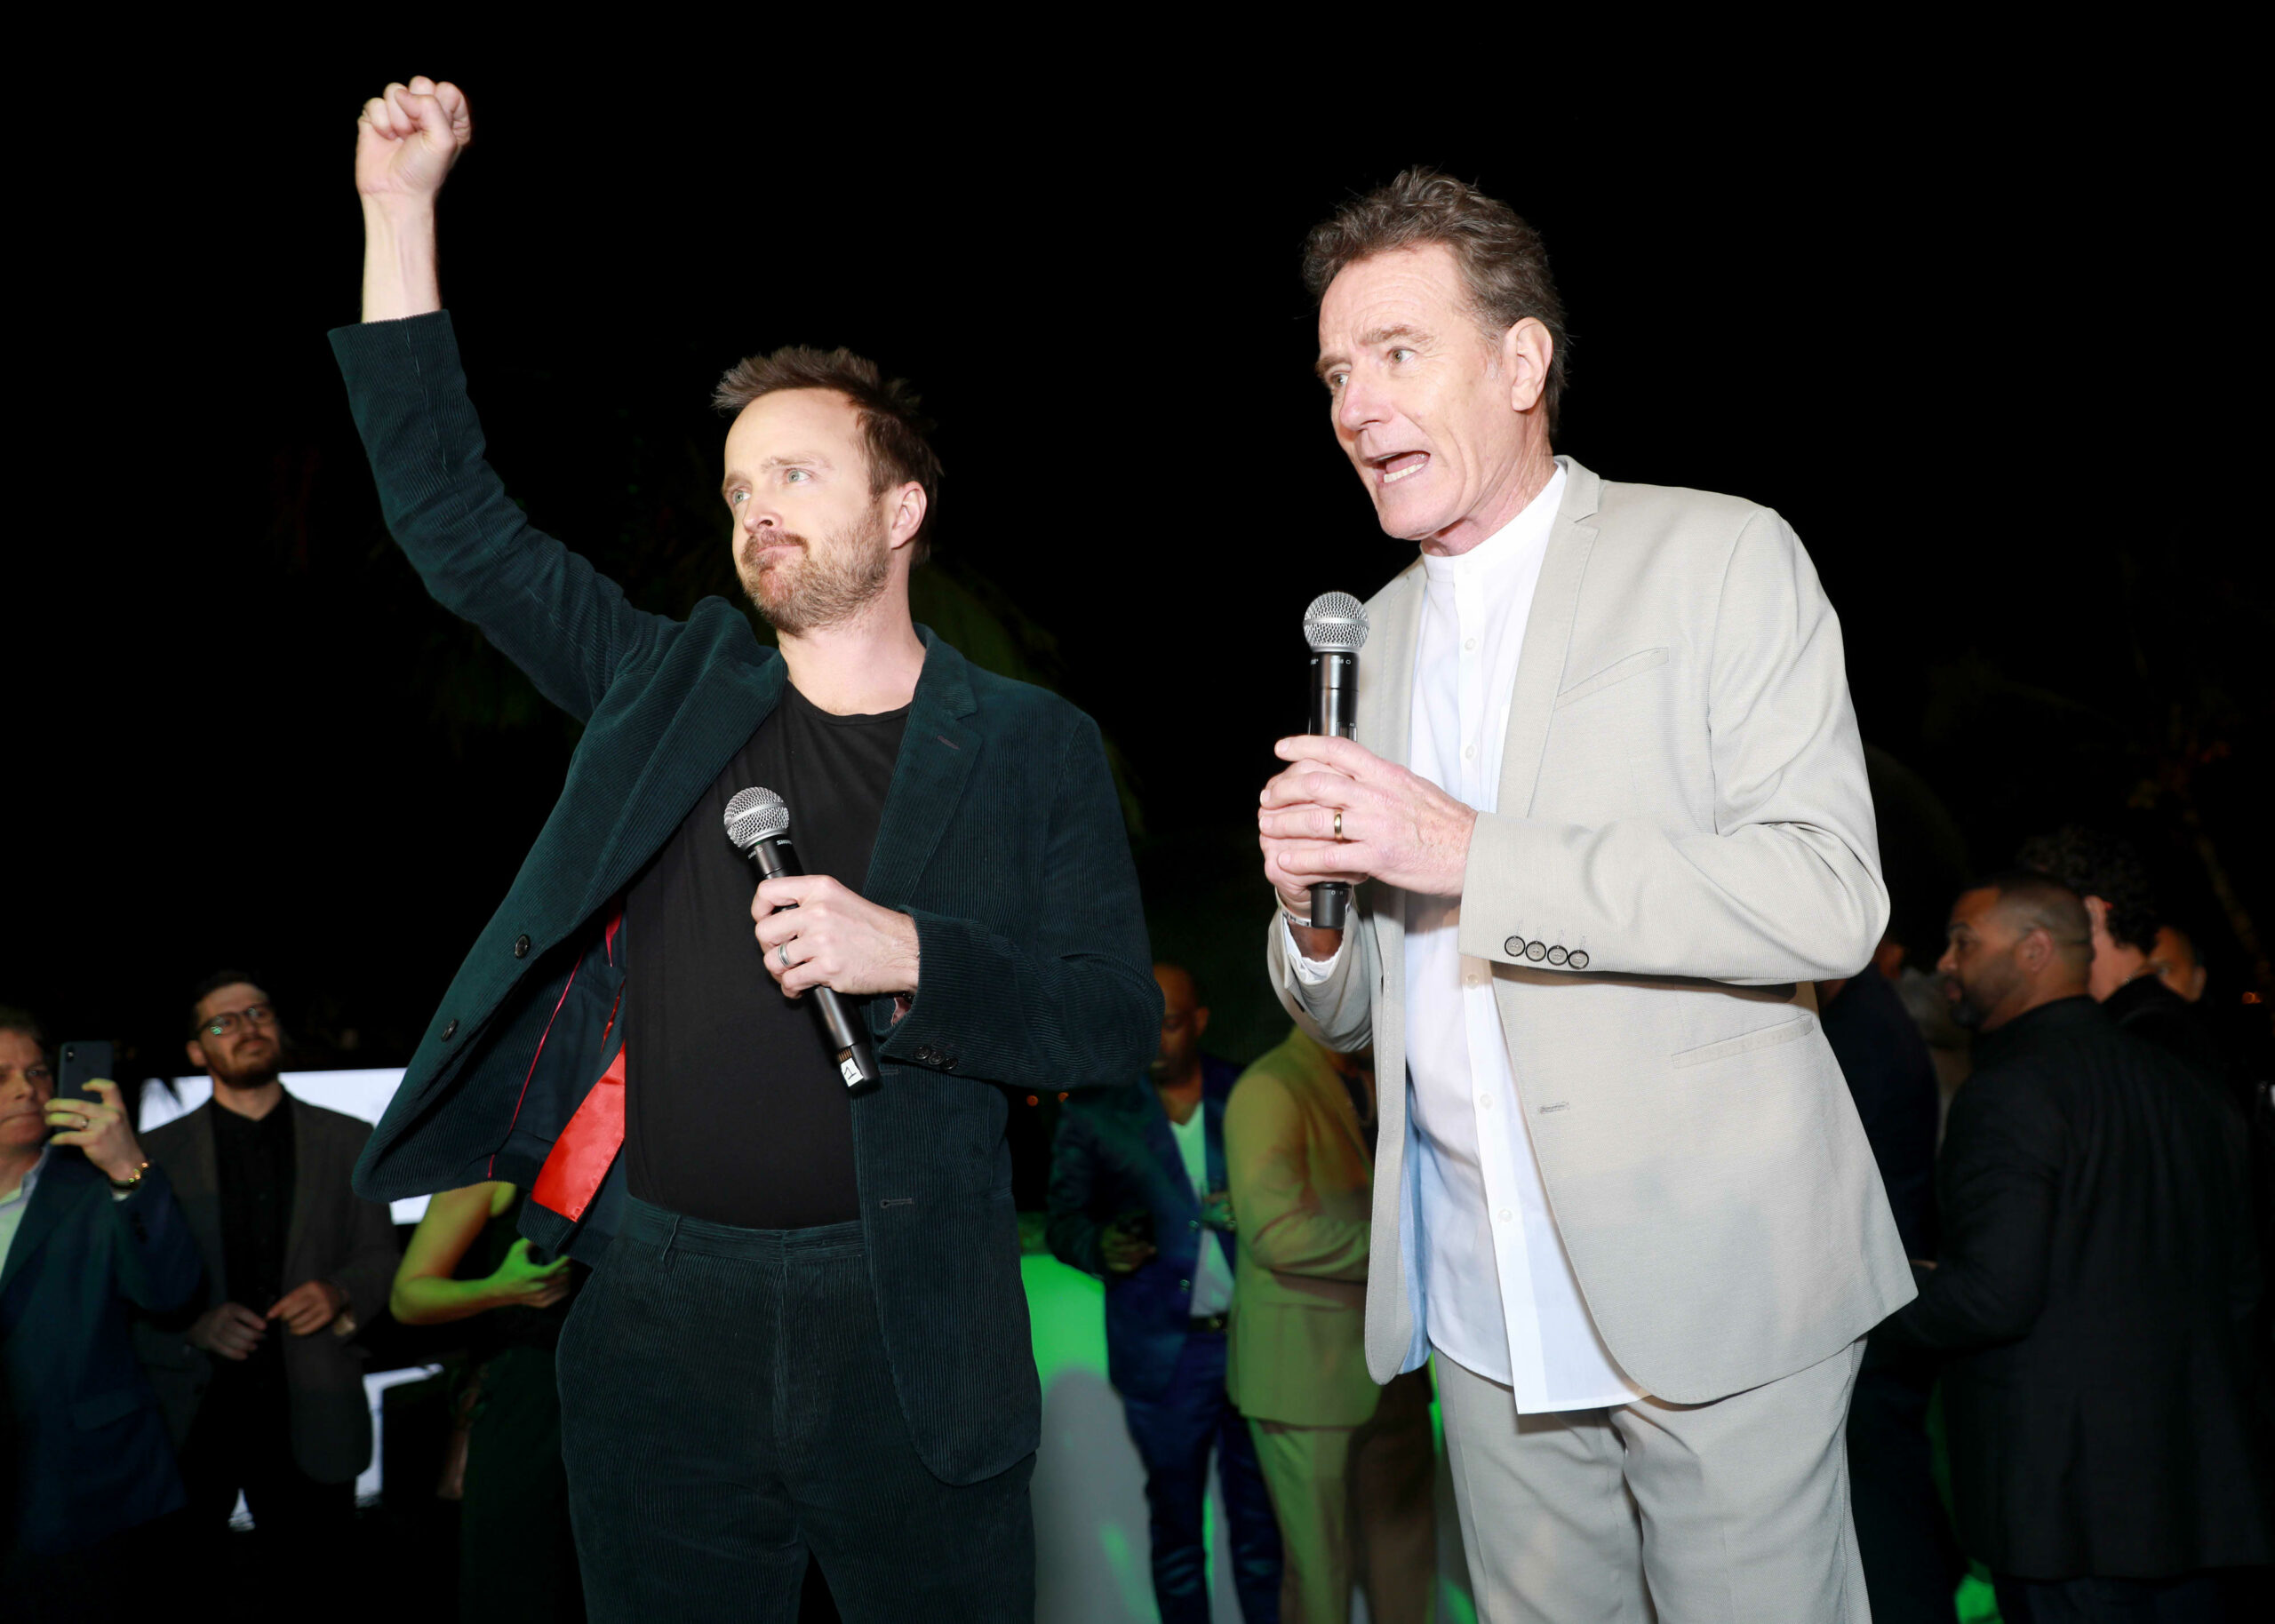 Constellation Manufacturers invests in Bryan Cranston and Aaron Paul’s mezcal